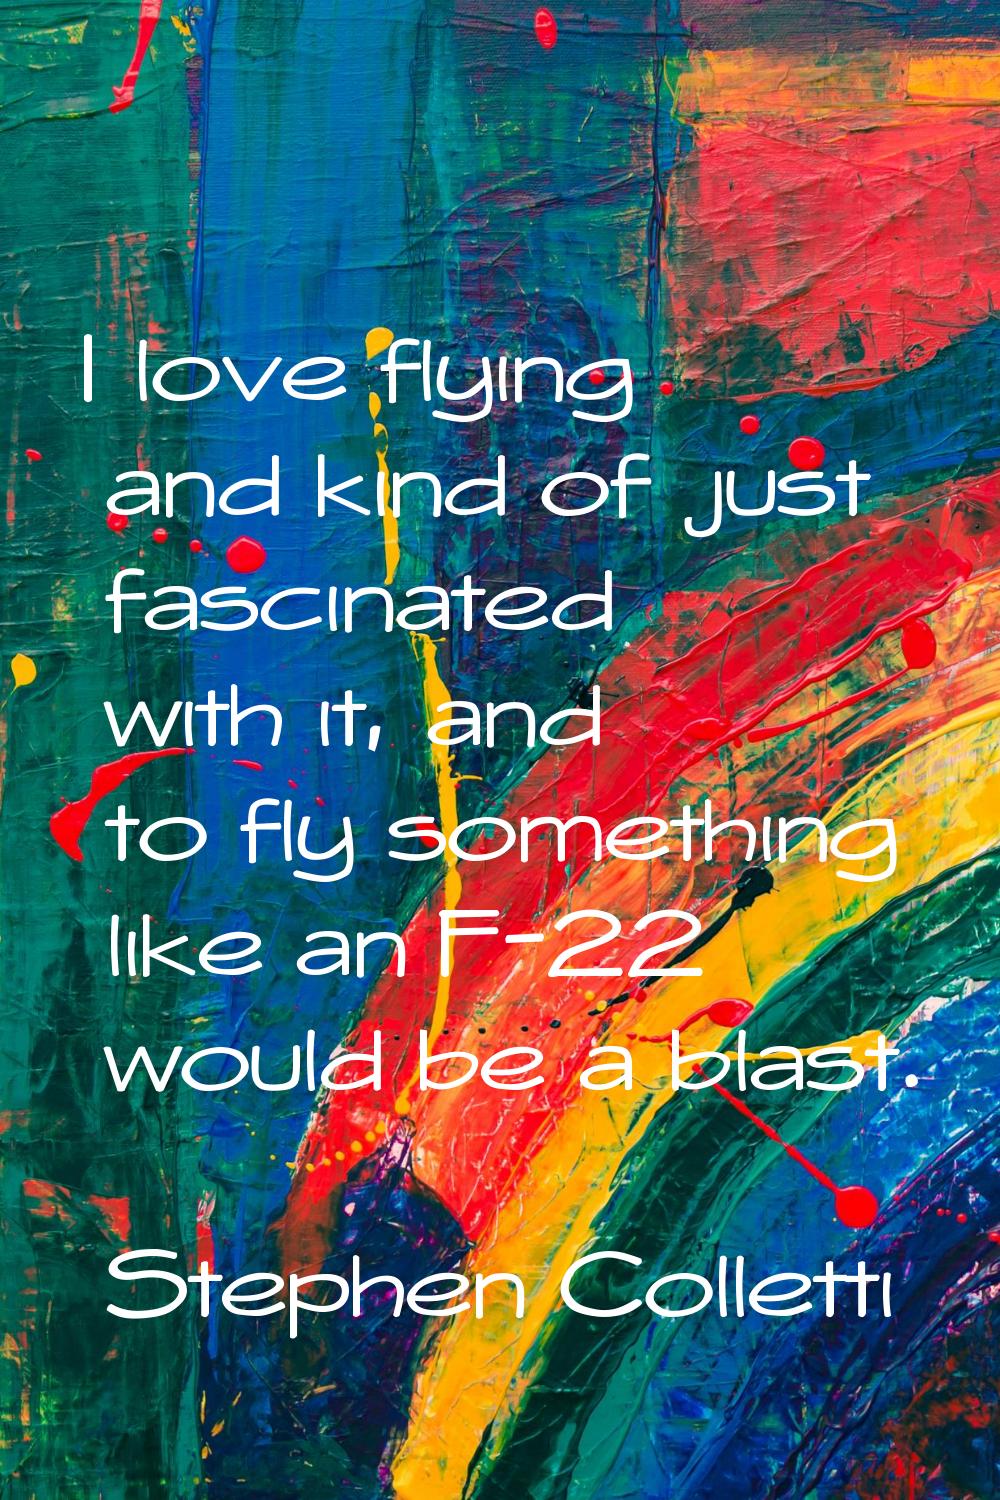 I love flying and kind of just fascinated with it, and to fly something like an F-22 would be a bla